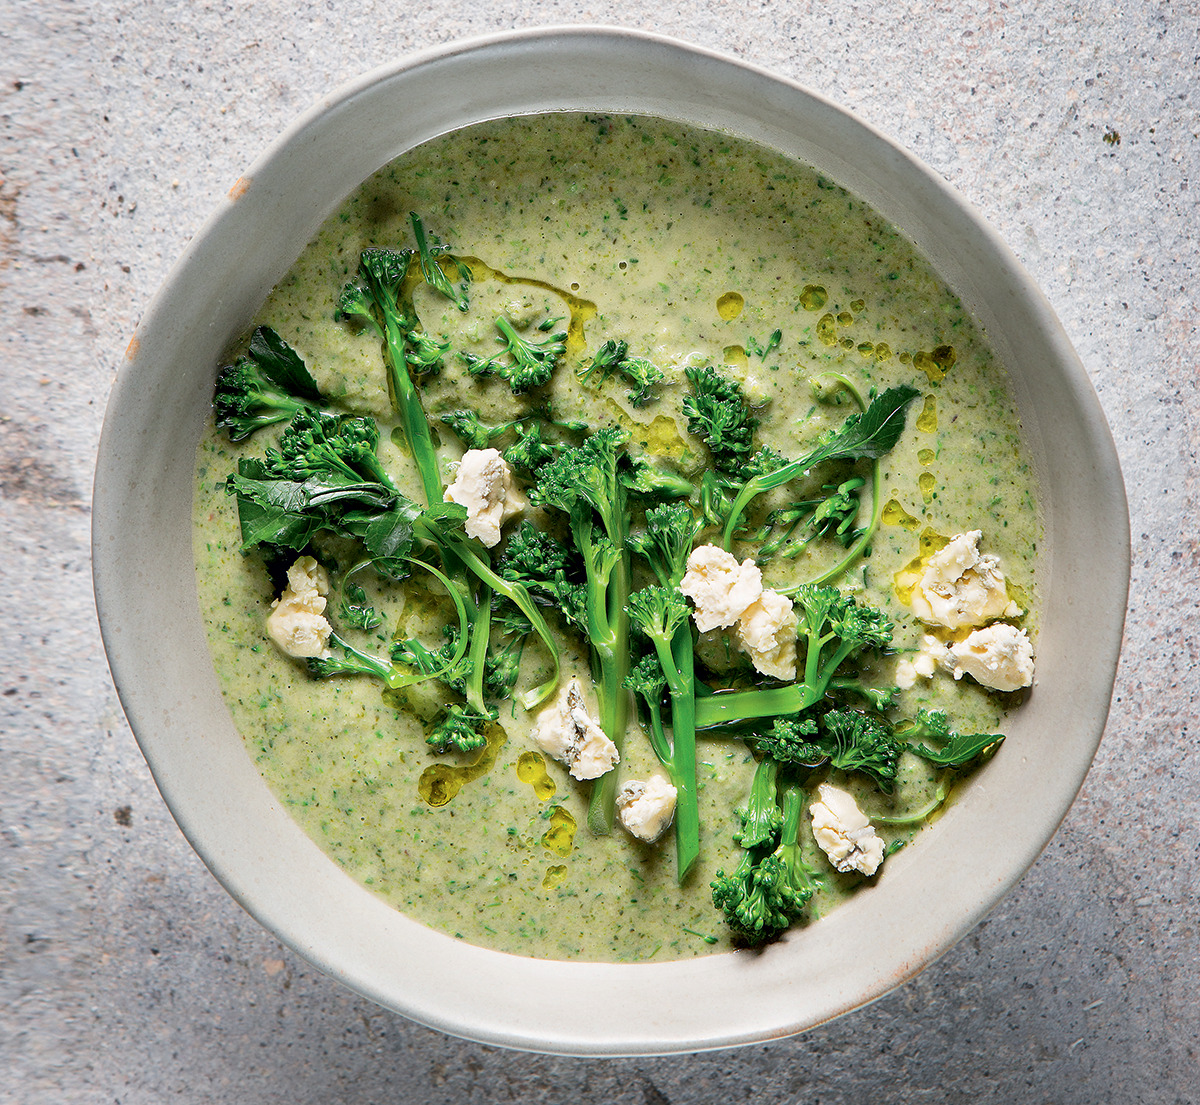 Tenderstem broccoli-and-blue cheese soup recipe